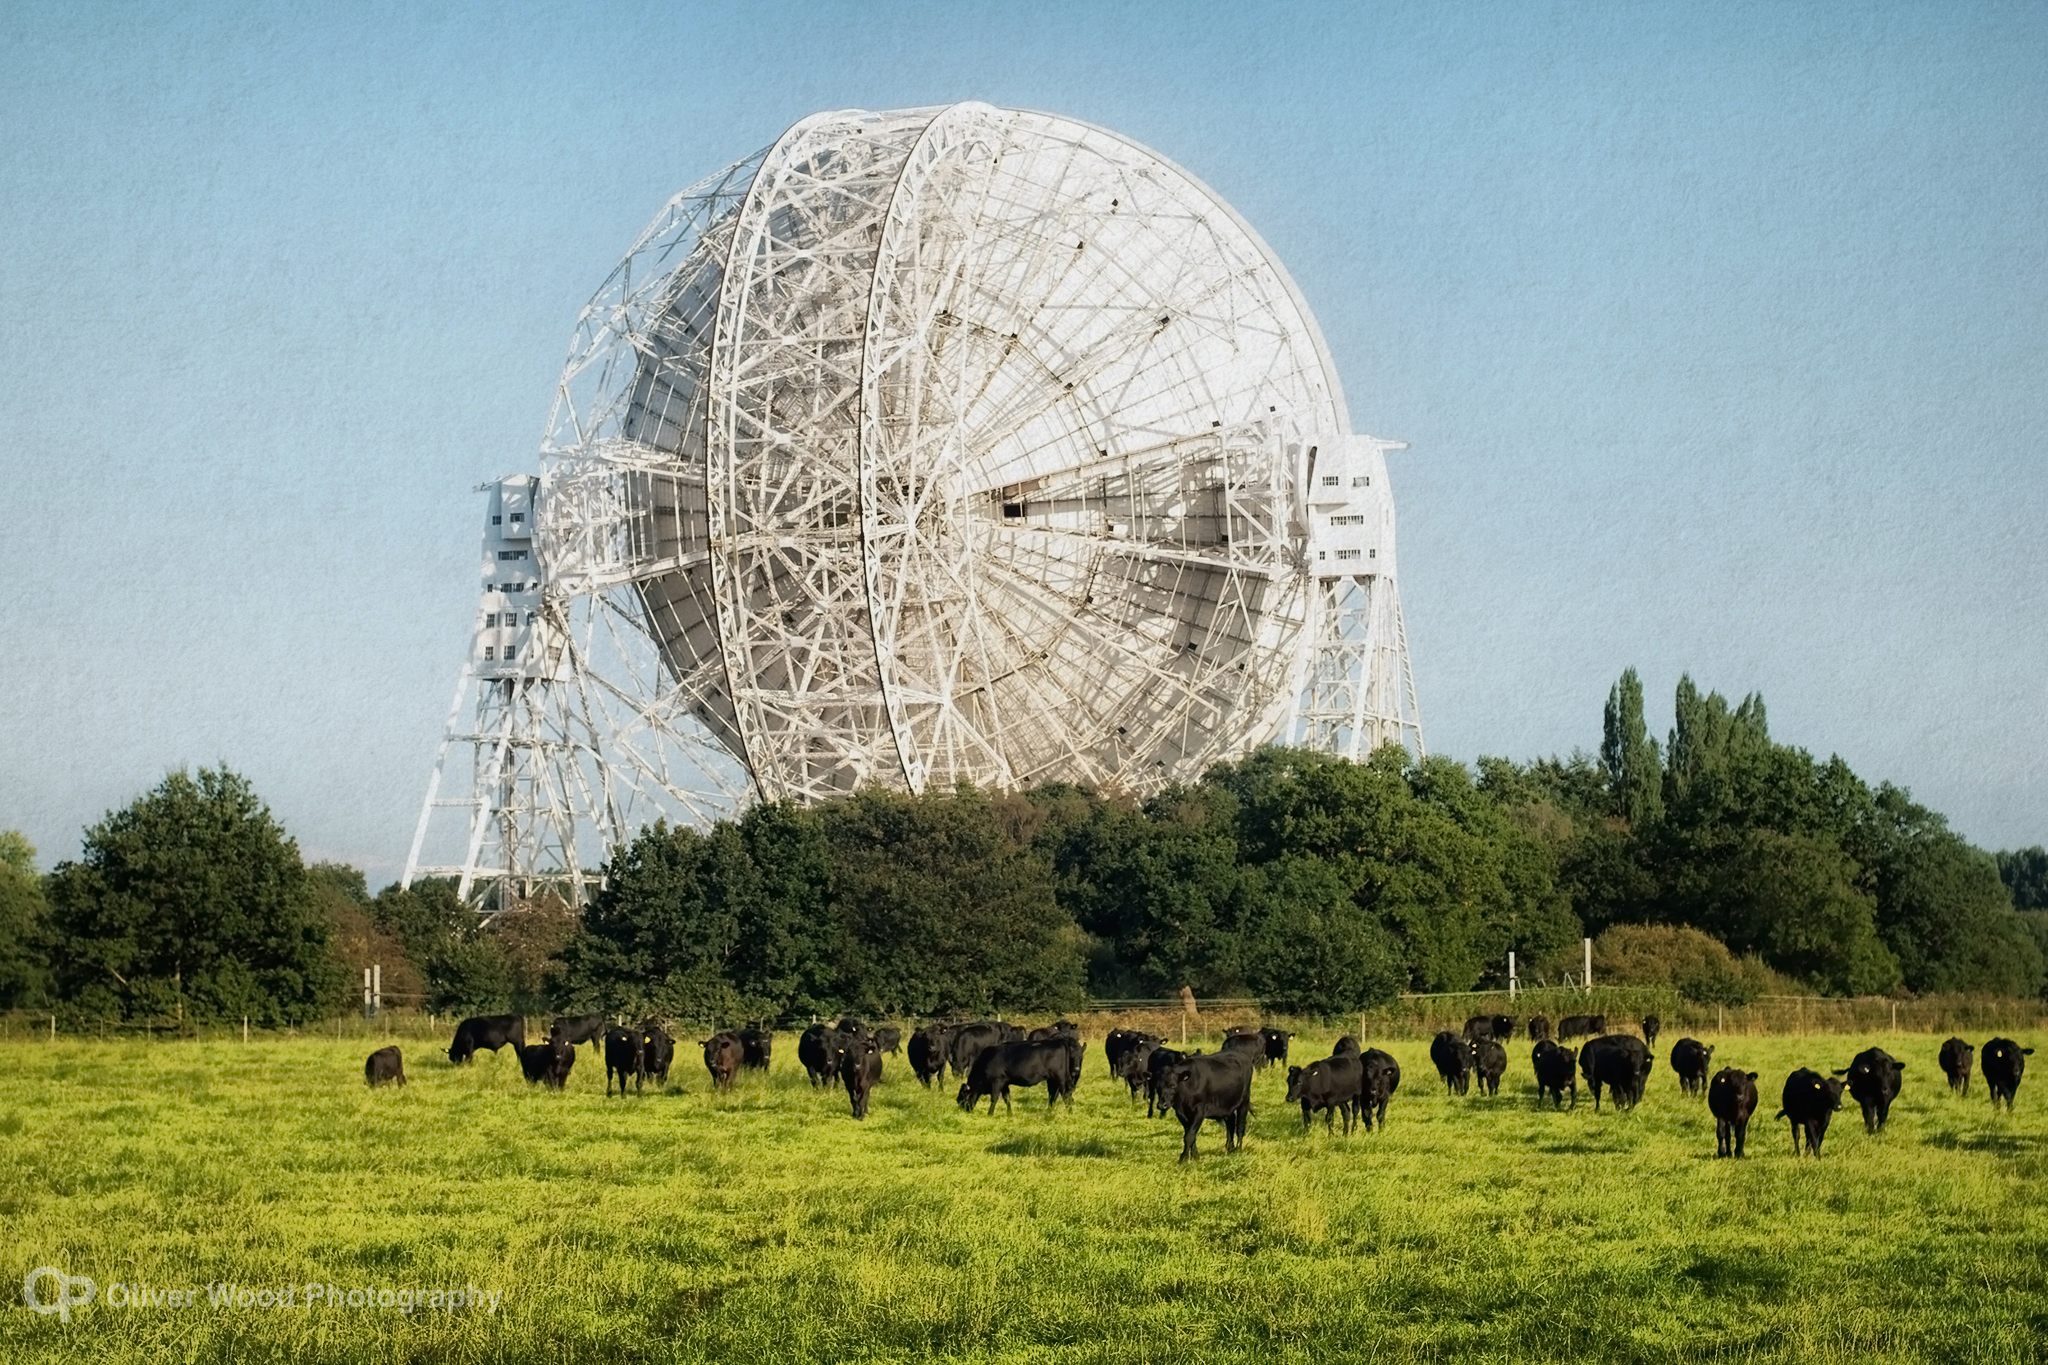 jodrell bank radio telescope and cows in a field